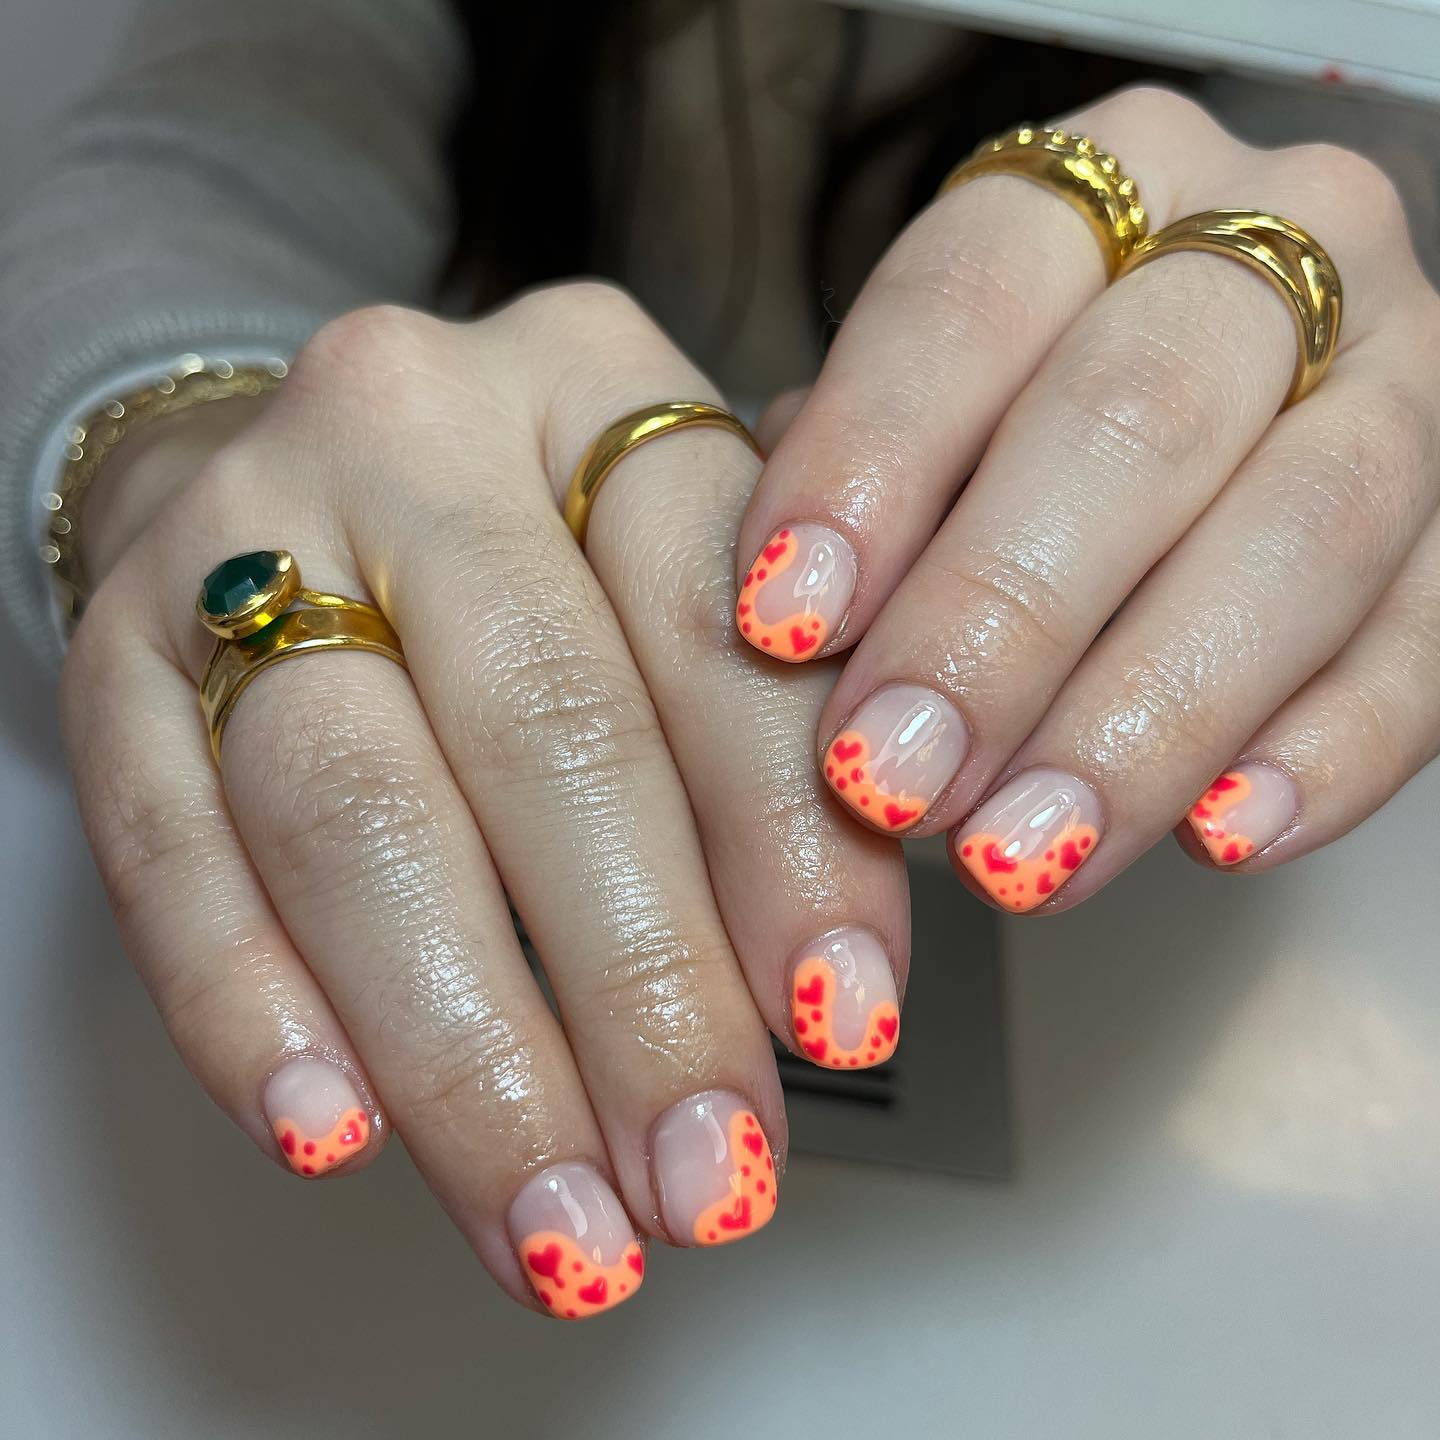 Summer nail art ideas to rock in 2021 : Mismatched colorful summer short  nails-thanhphatduhoc.com.vn